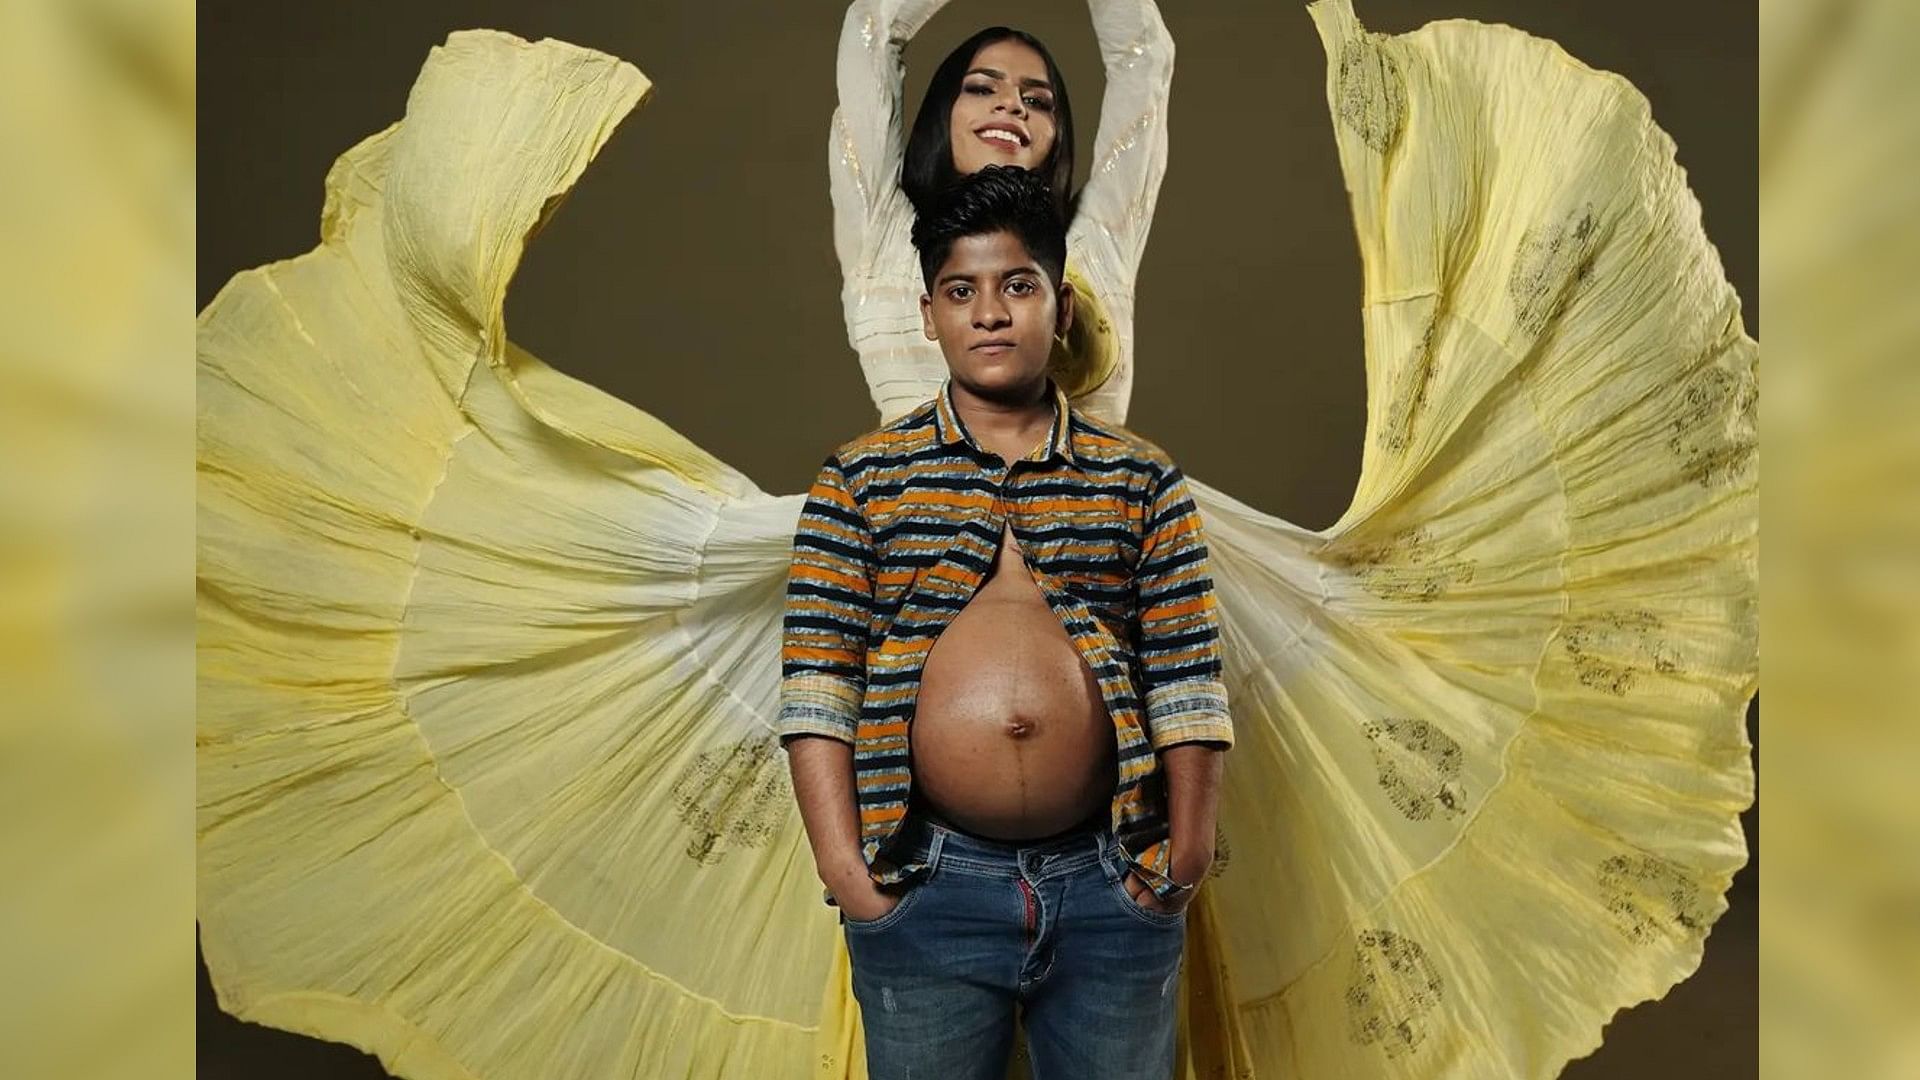 Transgender Couple Story Kerala trans man pregnant, know the interesting story About transgender couple